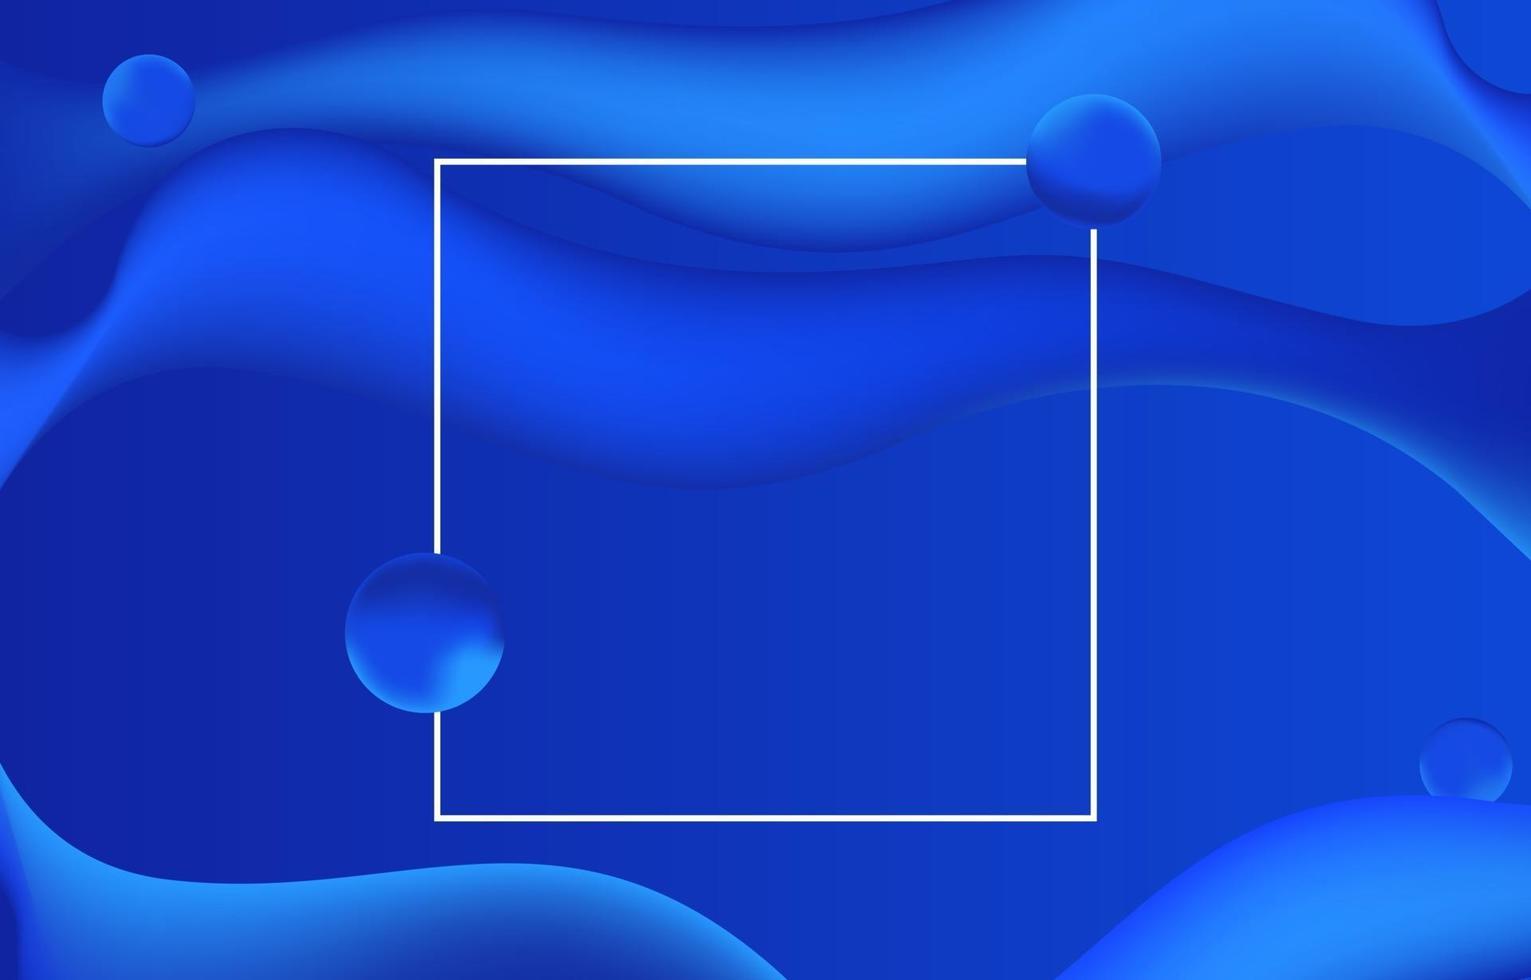 Simple Blue Liquid Abstract Background vector